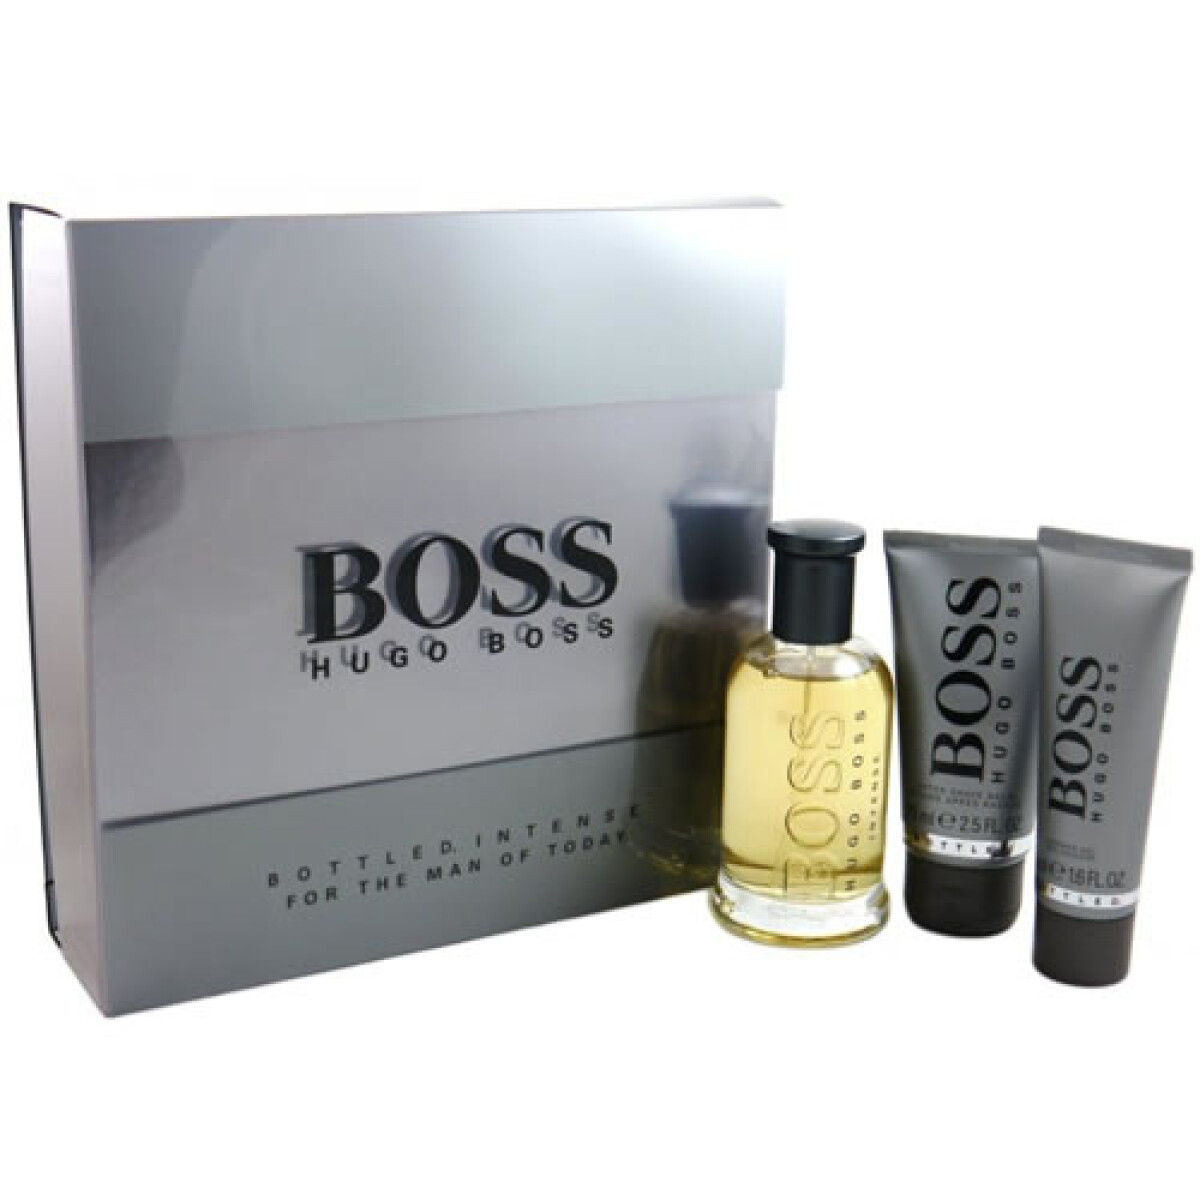 COFRE PERFUME BOTTLES 100 ML+ DEO +AFTER SHAVE HUGO BOSS 